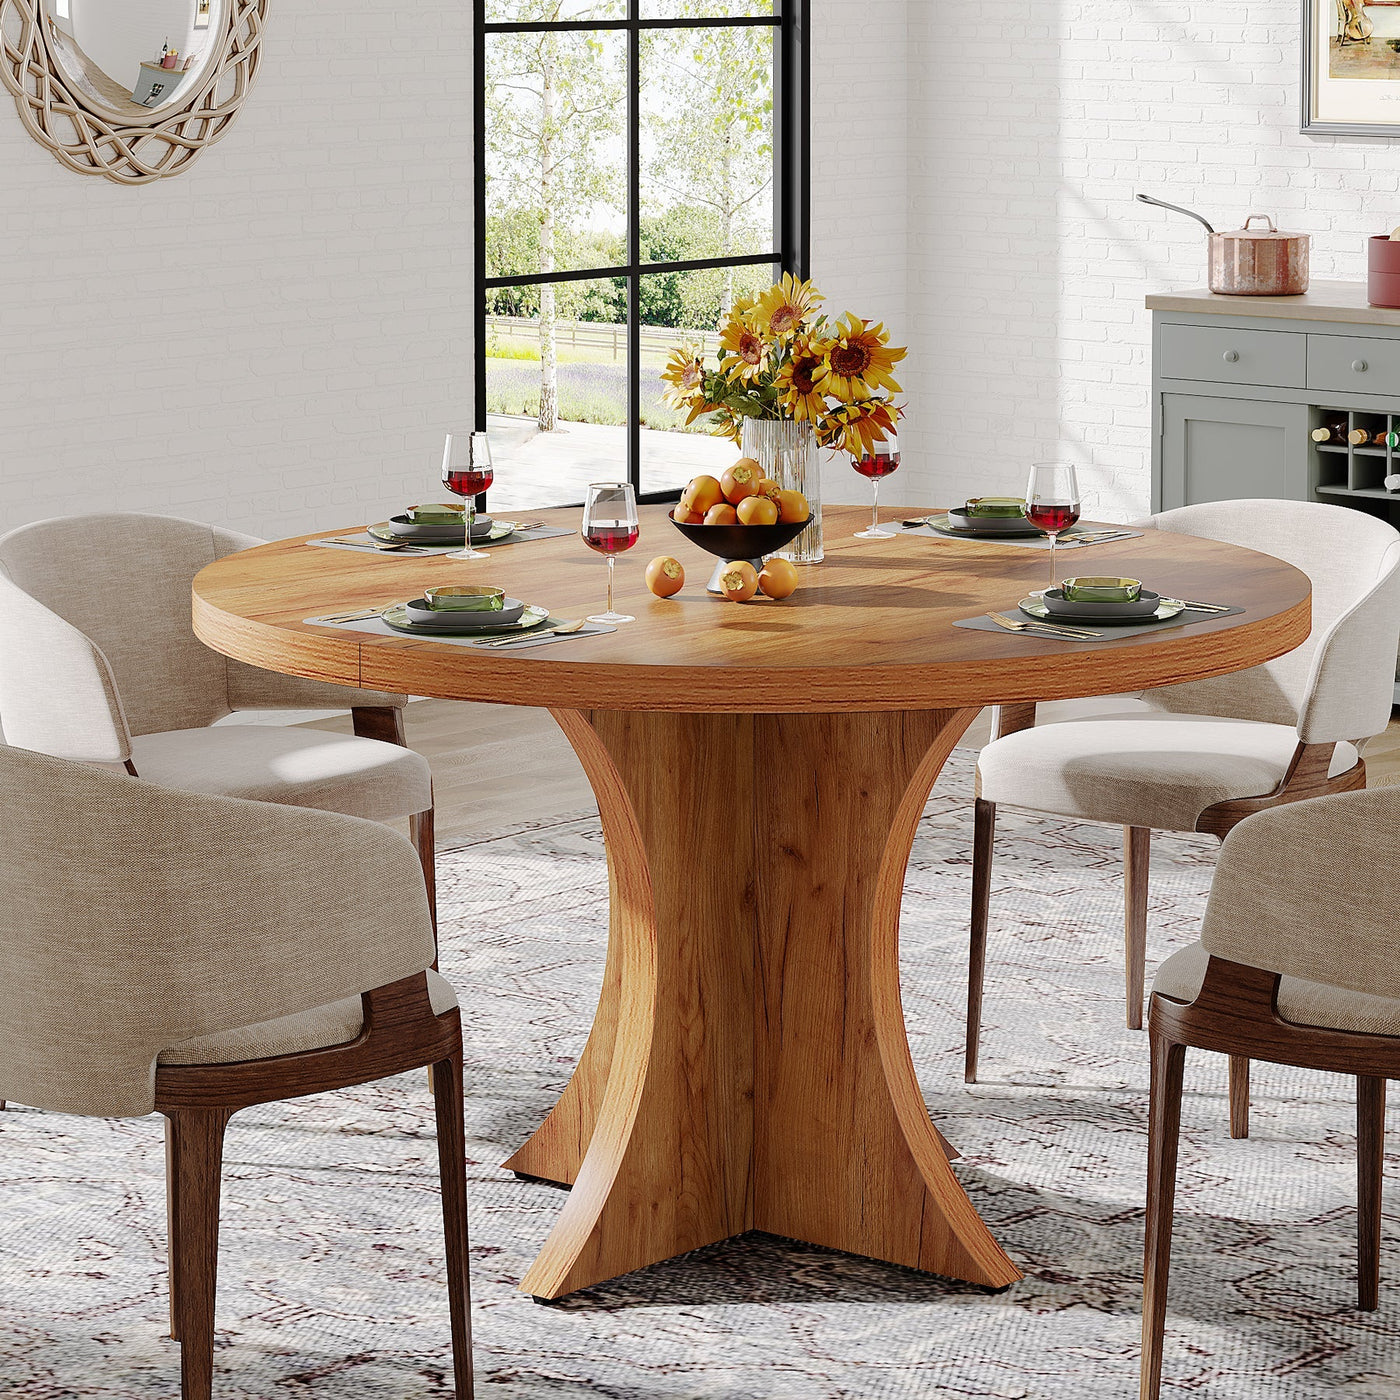 Tensan Round Wood Dining Table | 47.24 Inches Circle Kitchen Table for 4-6